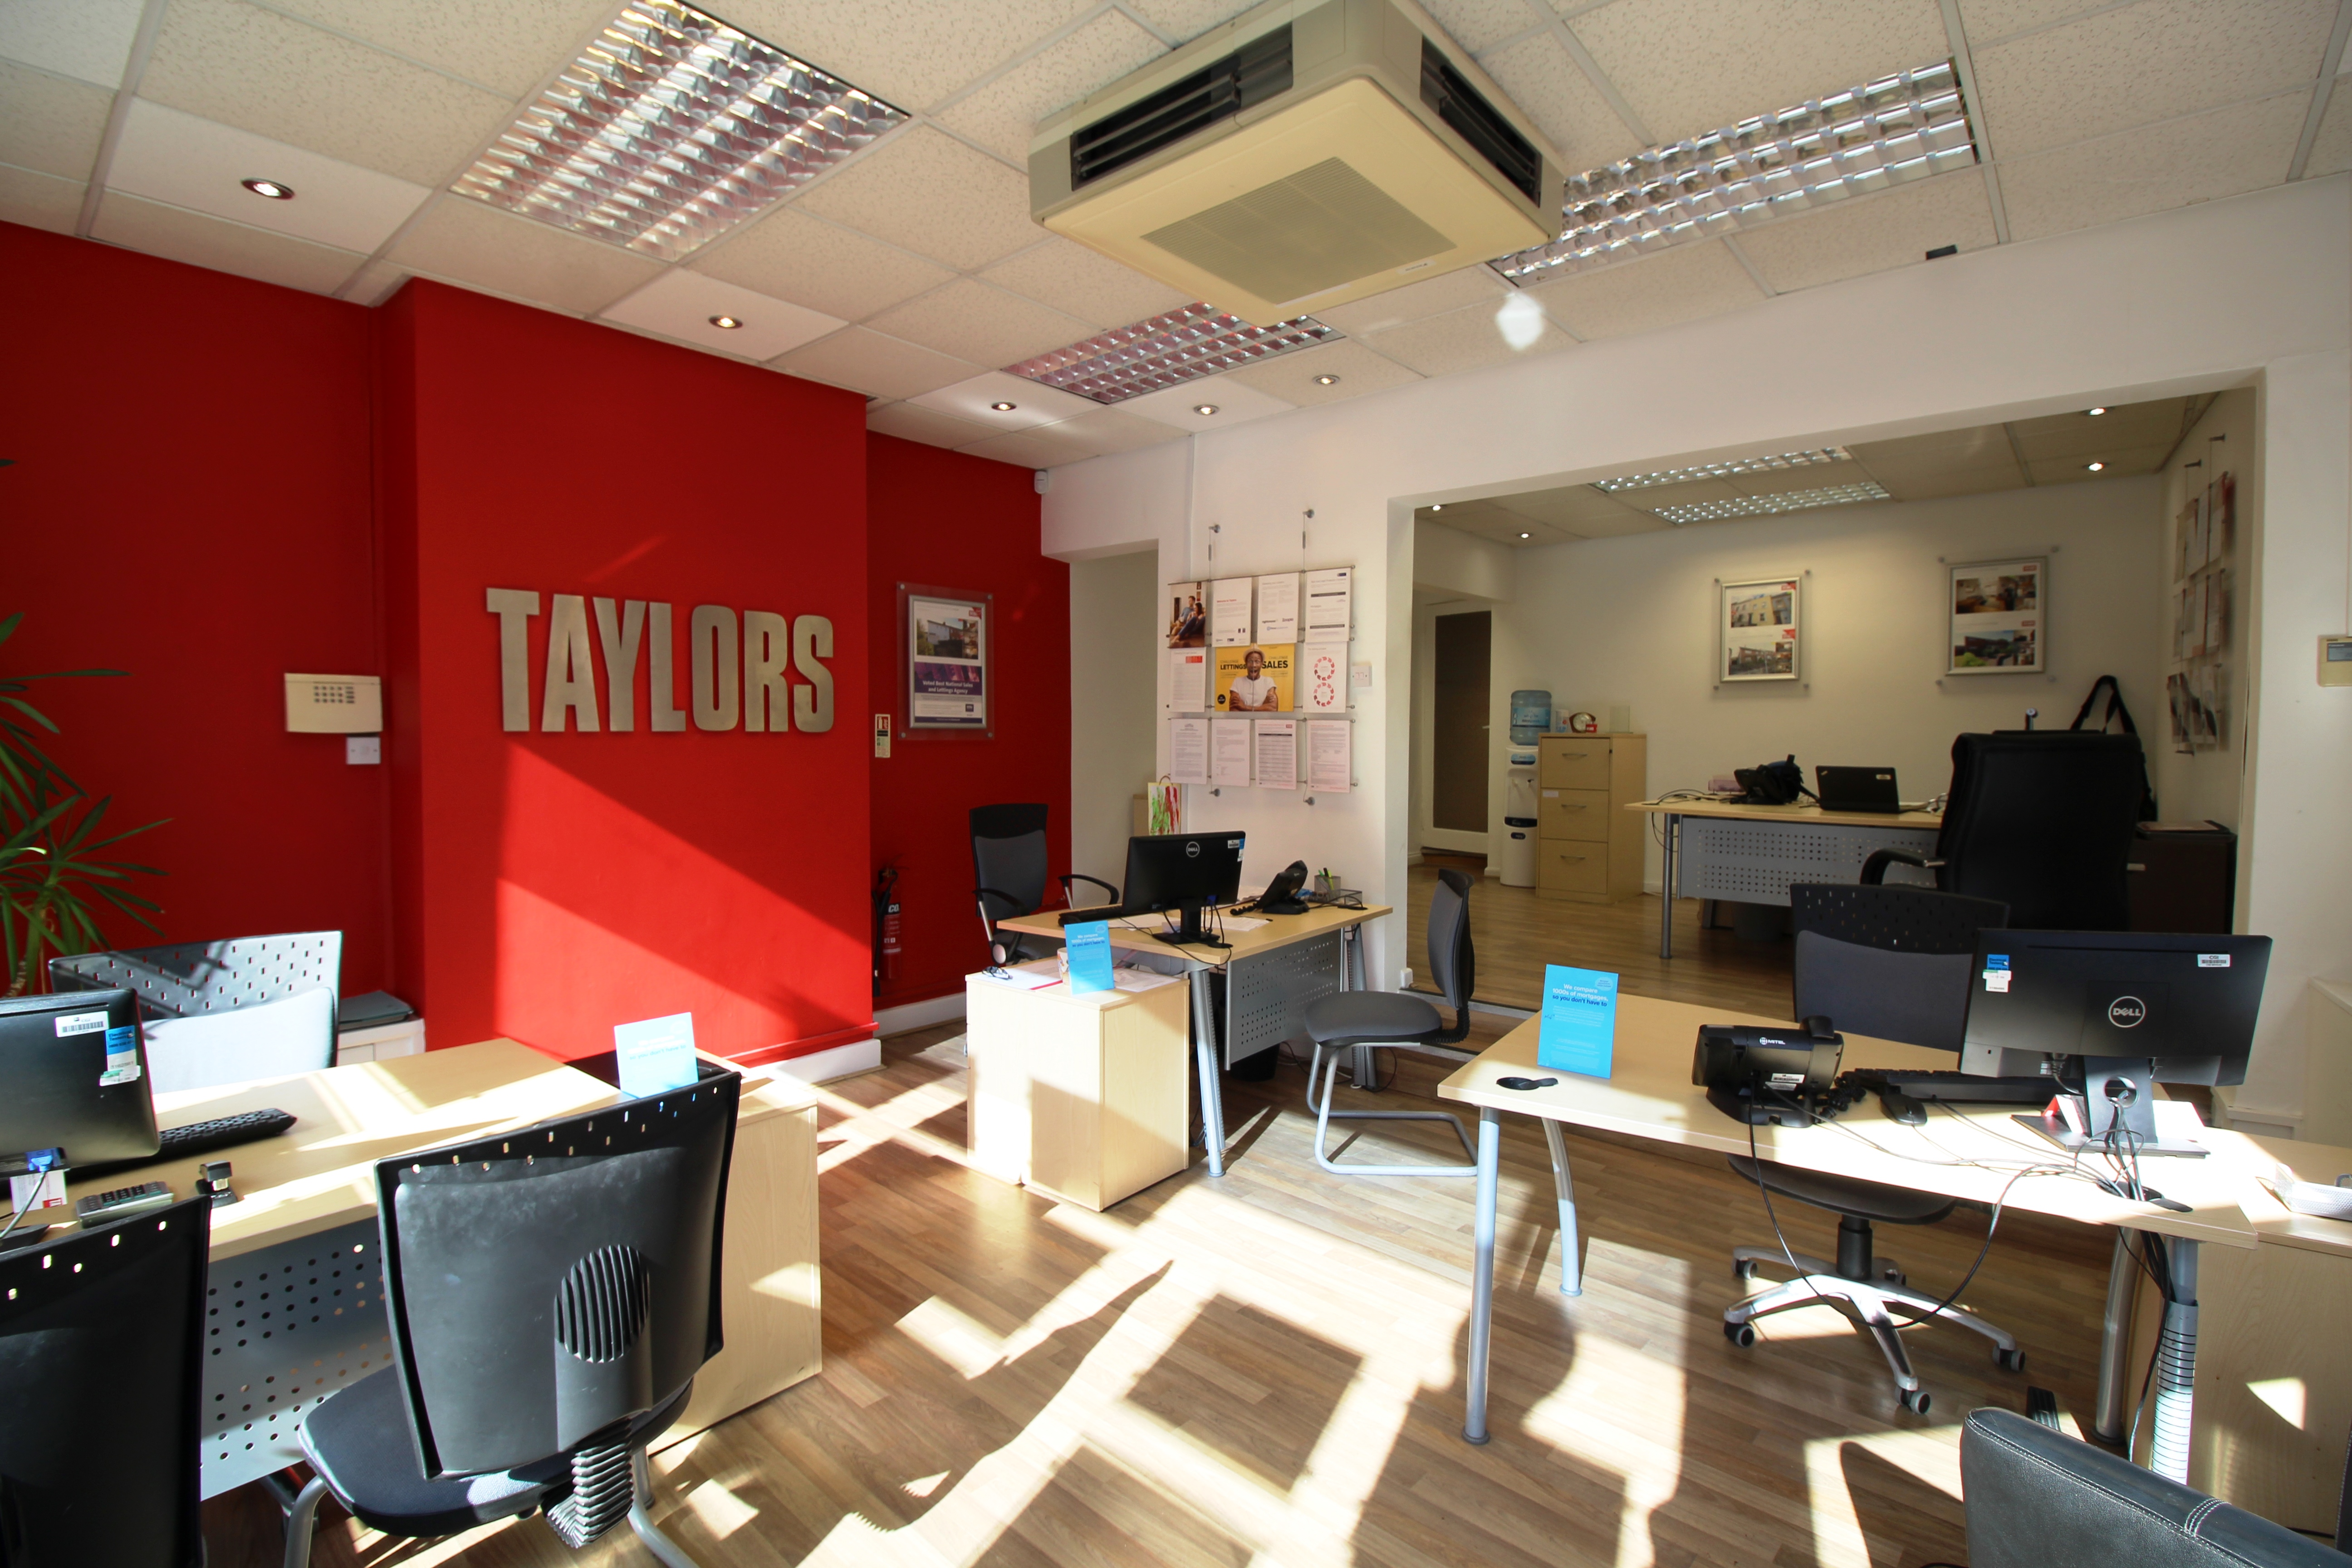 Taylors Sales and Letting Agents Bedminster Bristol 01173 690265